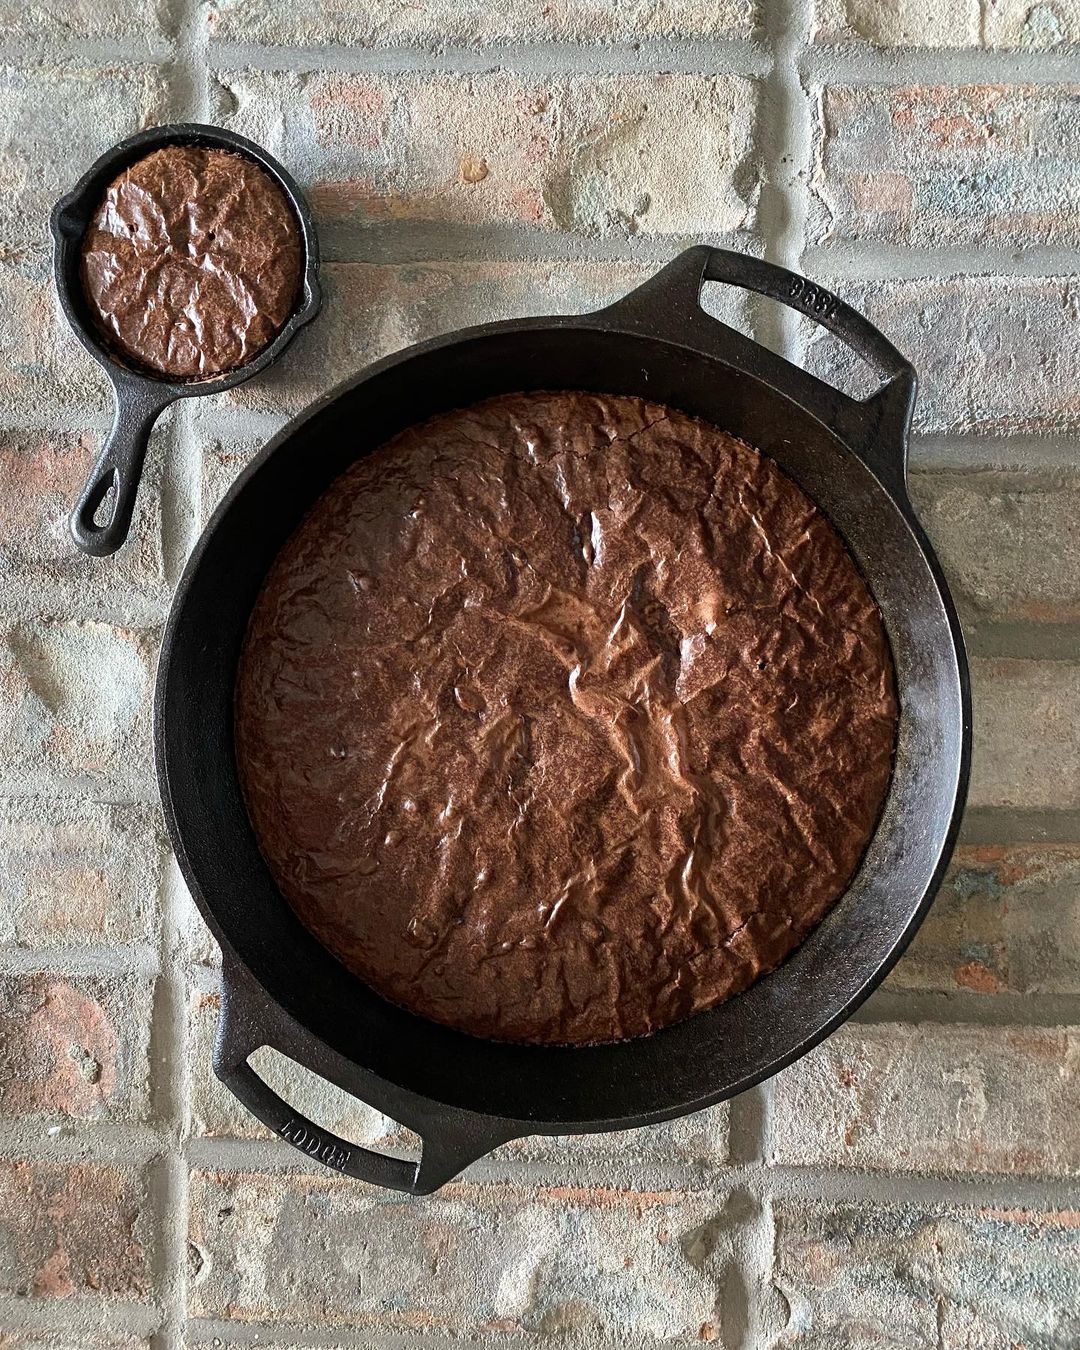 The Ultimate Way to Season Cast Iron